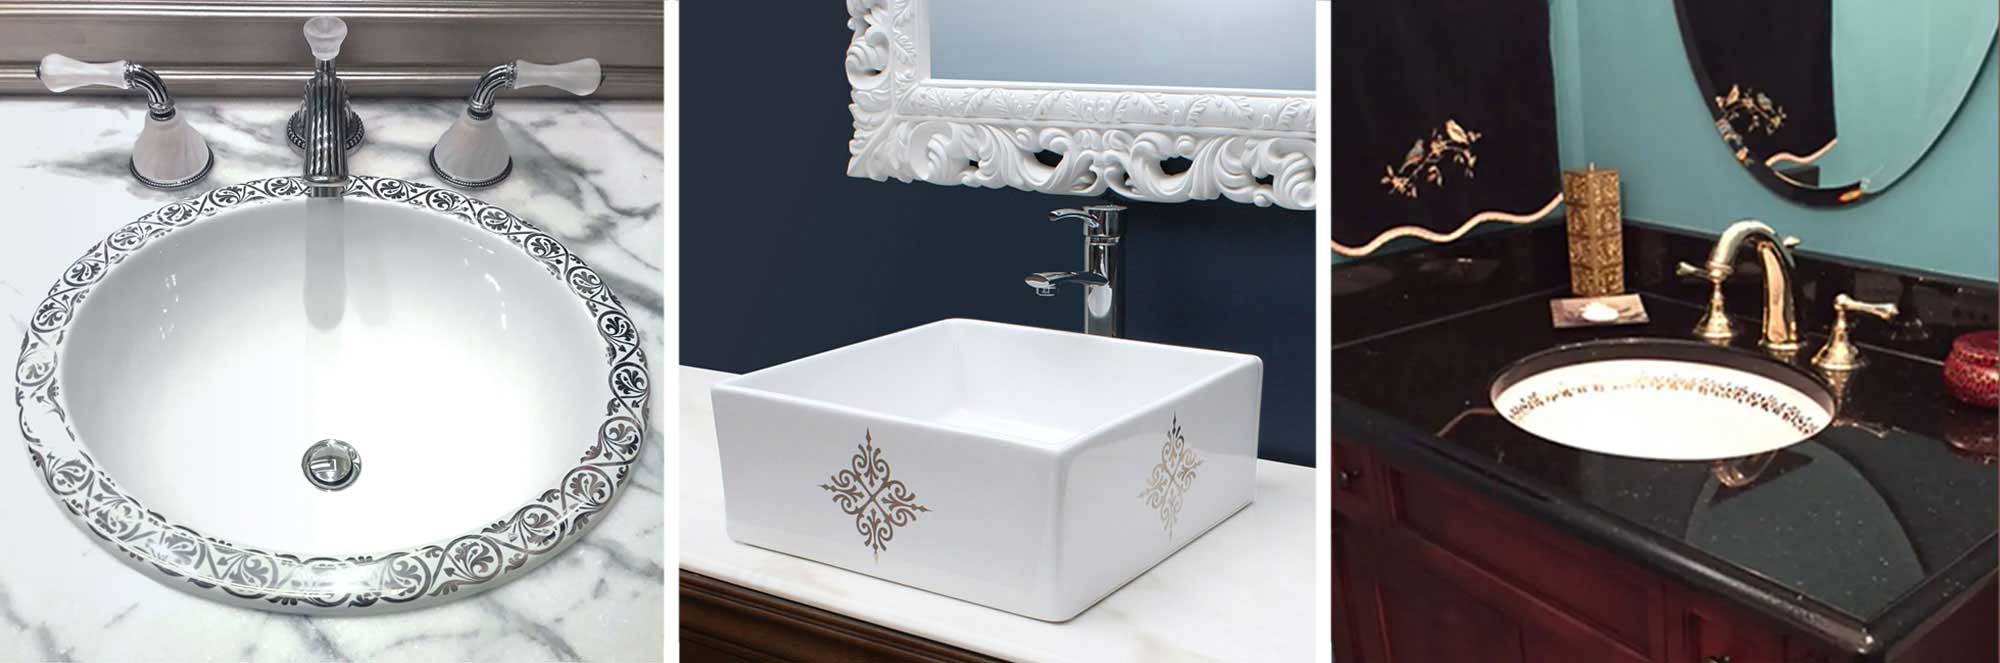 decorated bathroom ideas with painted sinks